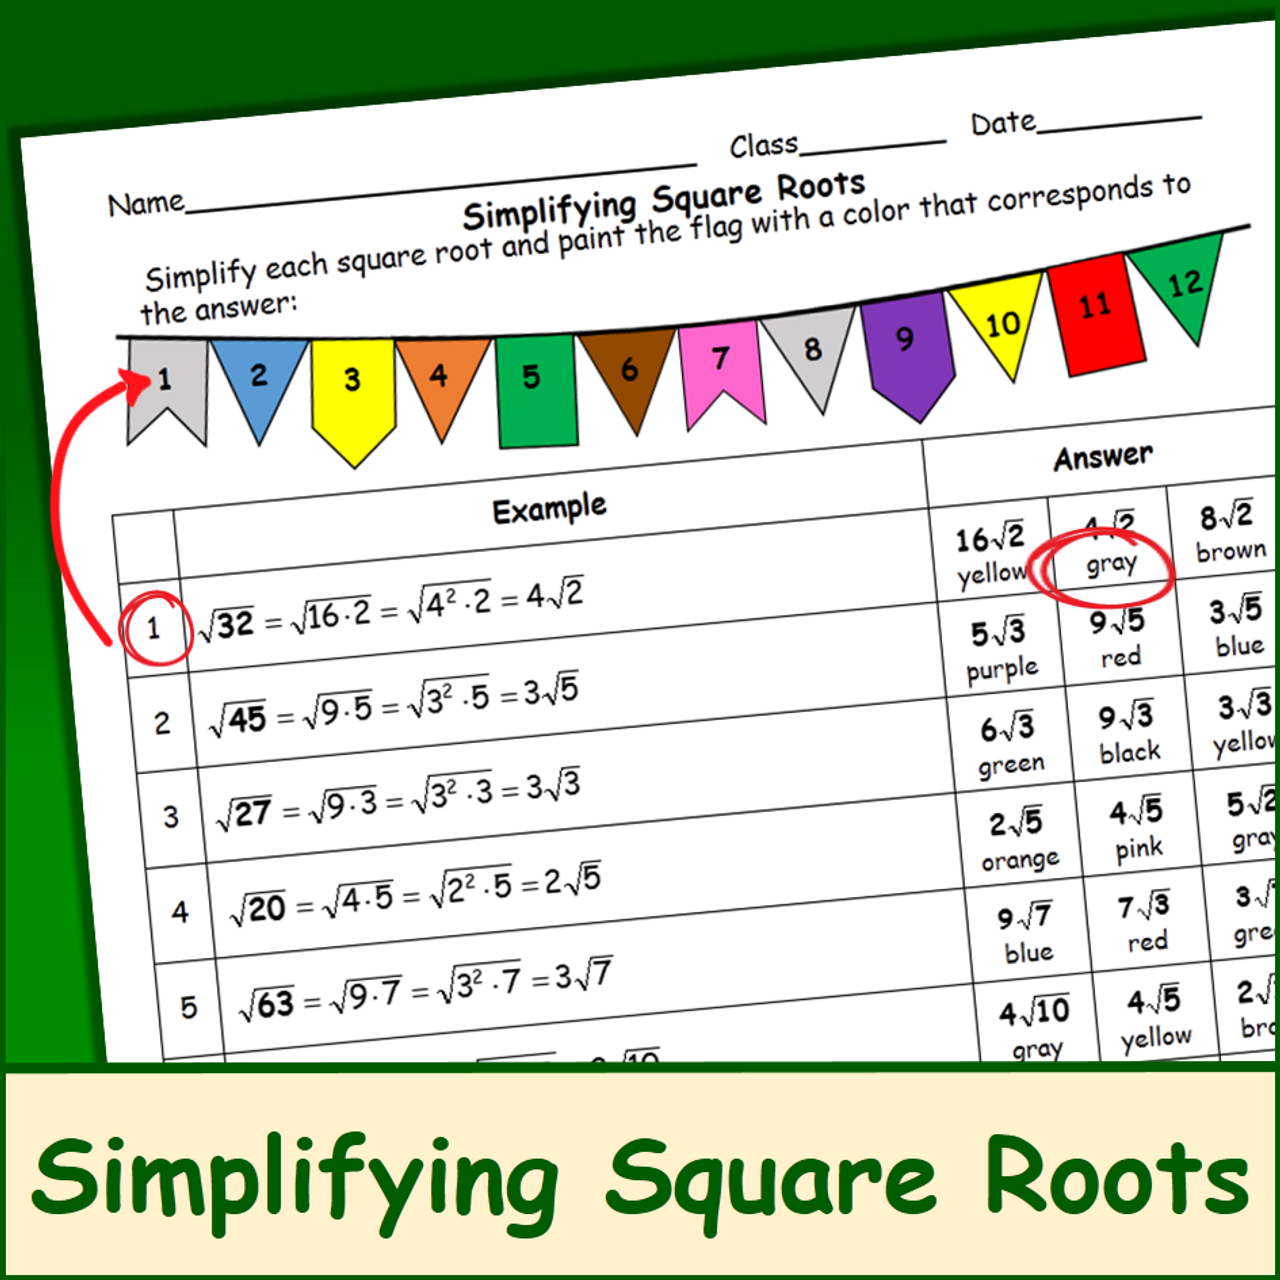 Multiplying Polynomials Worksheet Coloring Activity | TUTORE.ORG - Master of Documents